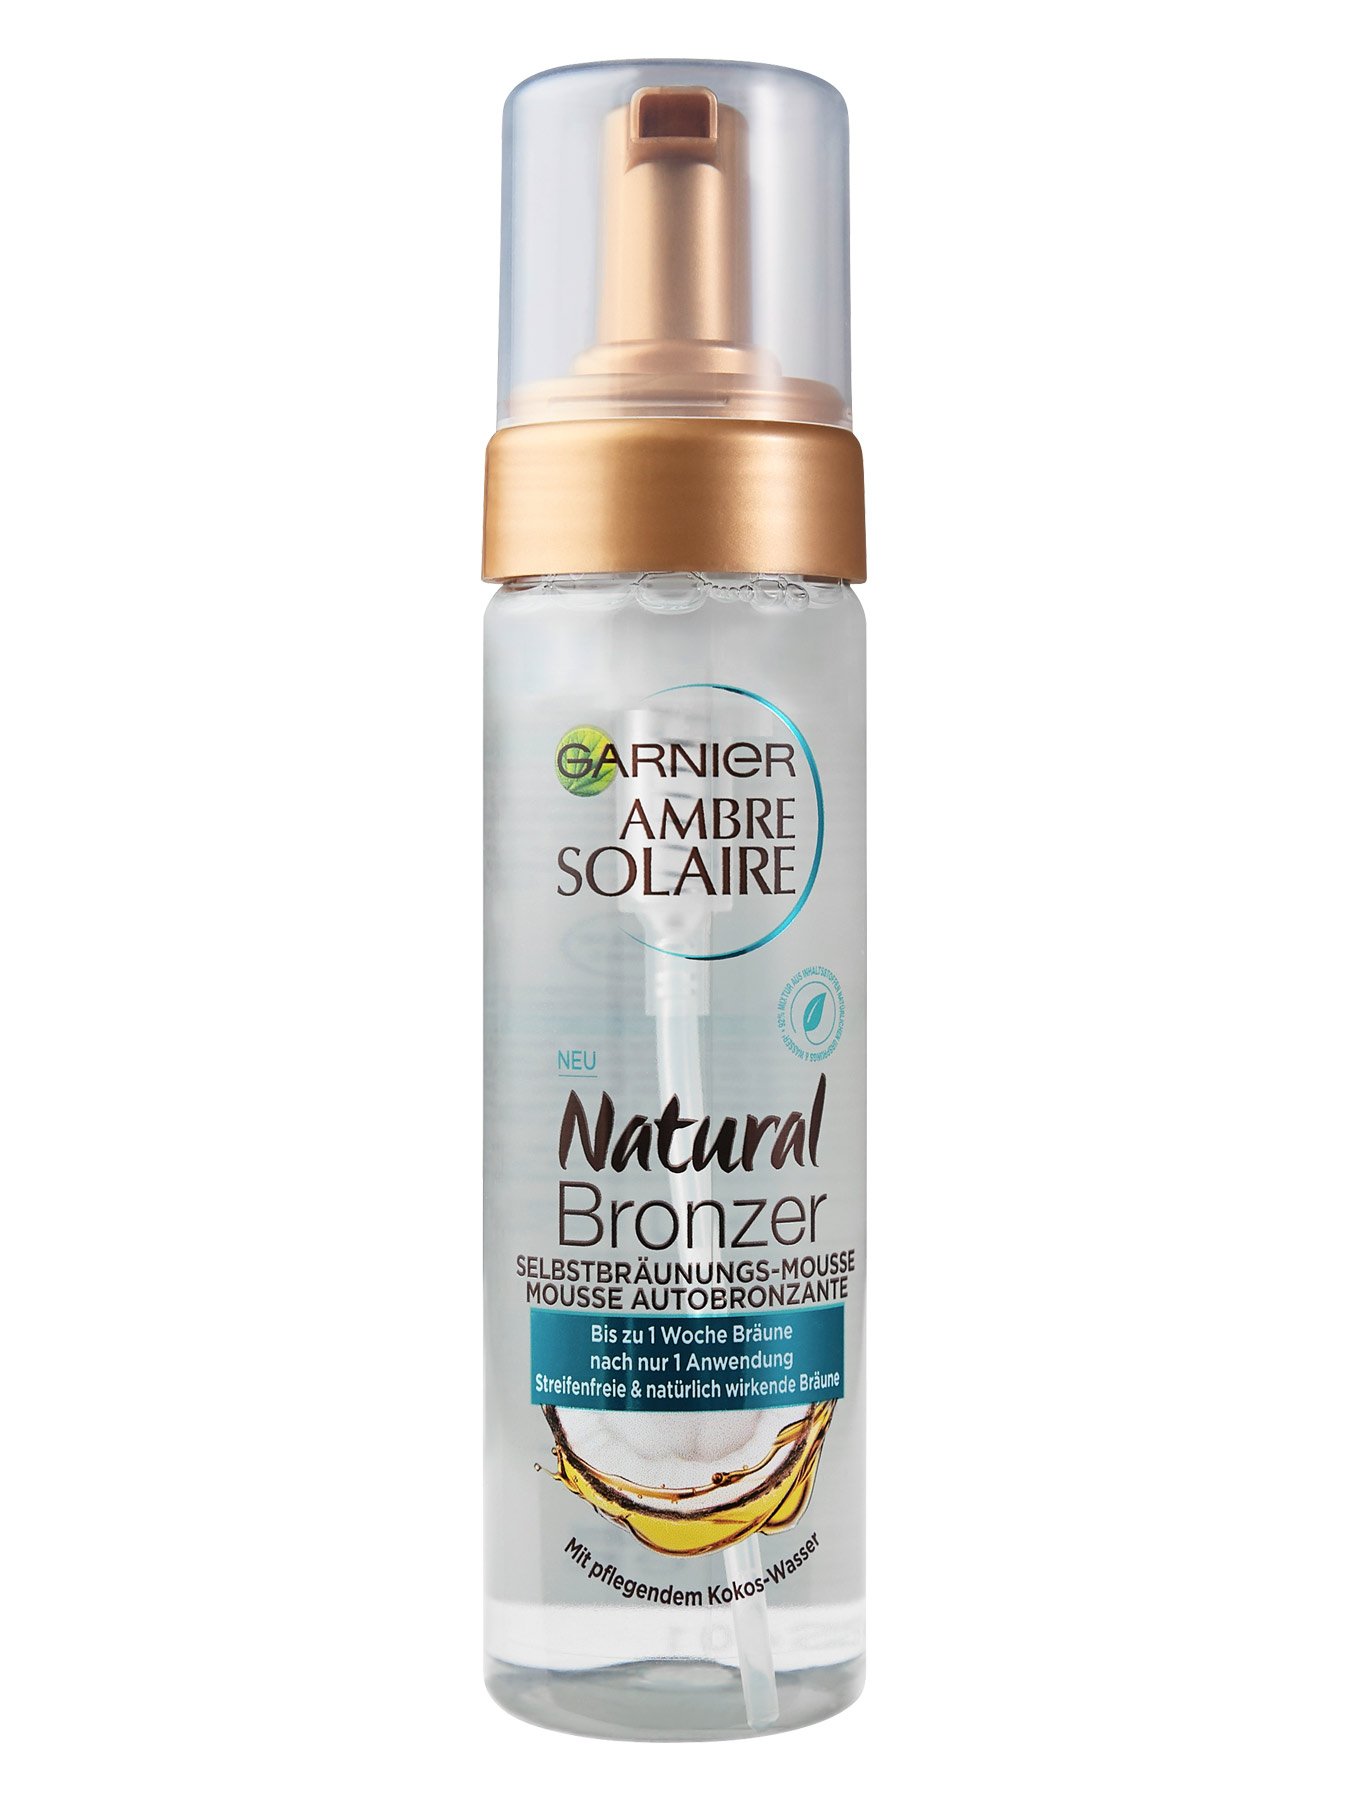 Ambre Solaire Natural Bronzer – Selbstbräunungs-Mousse